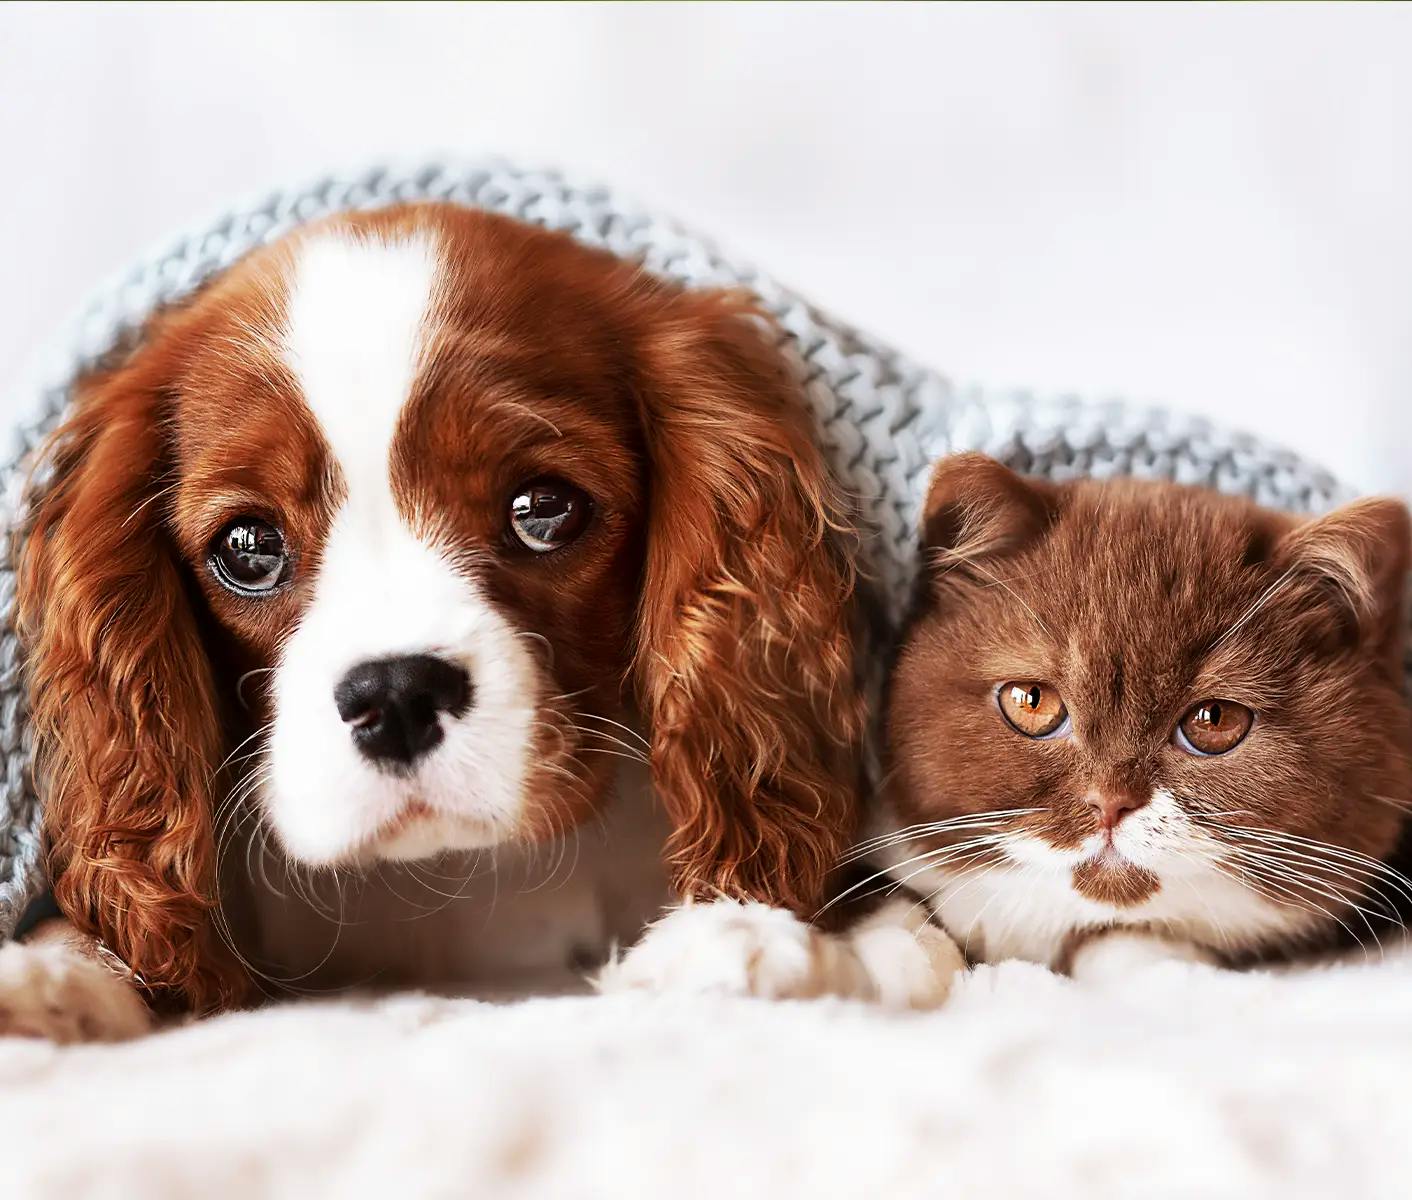 dog and cat under a blanket